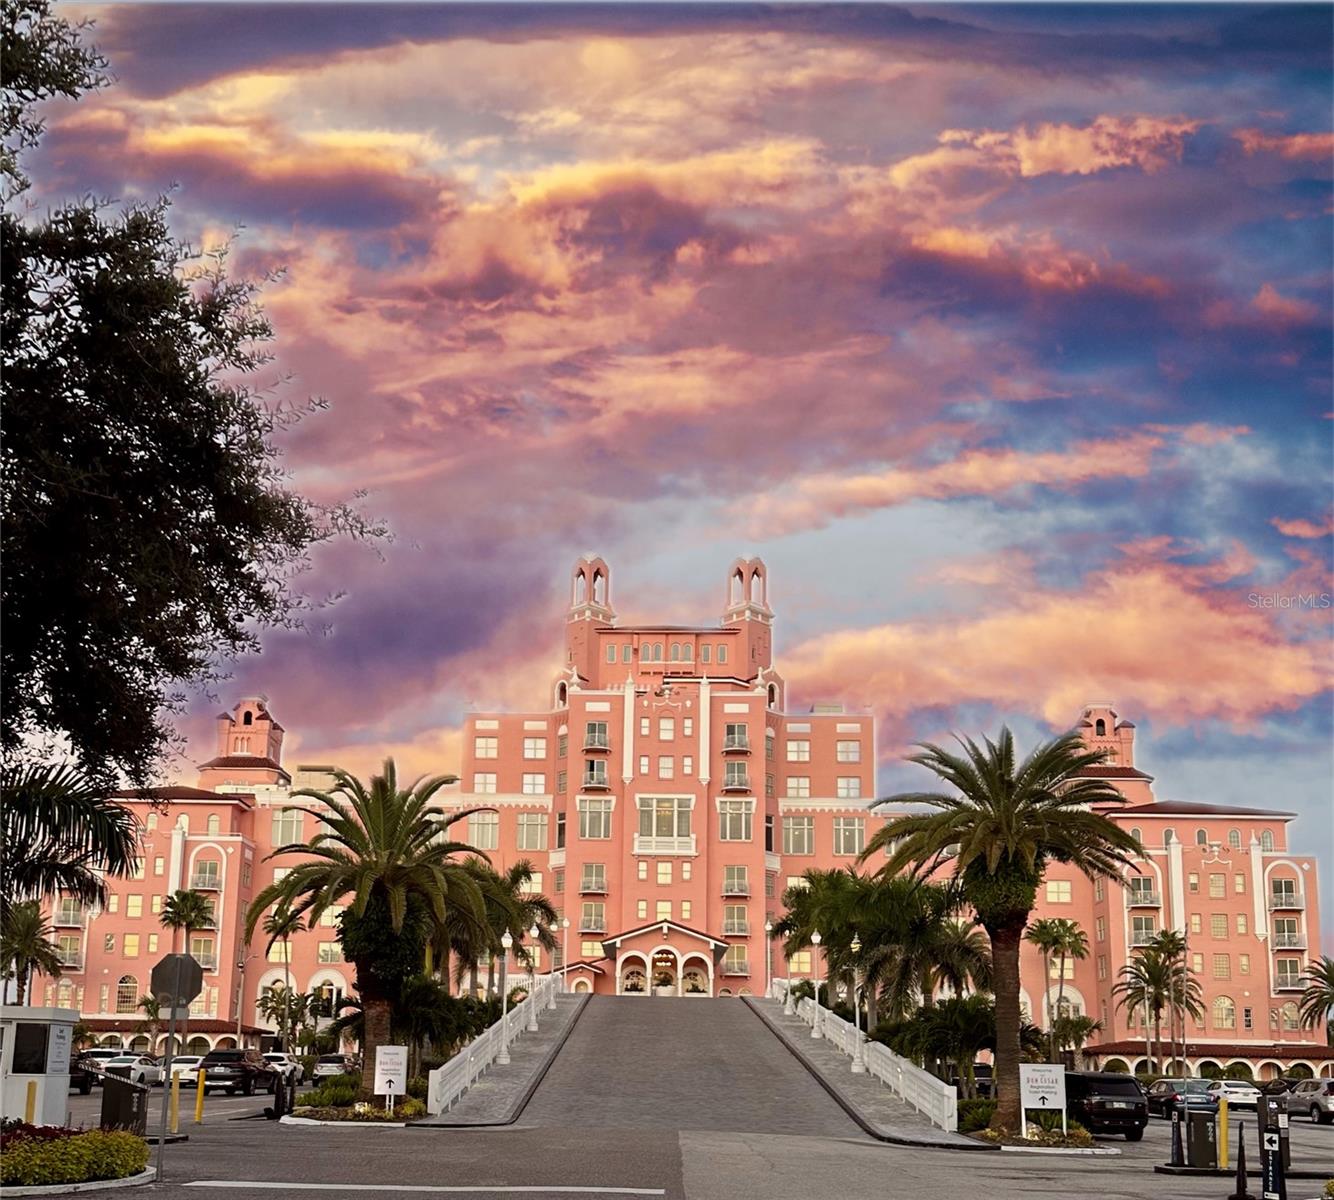 The Don Cesar Resort and Spa is a bike ride away!